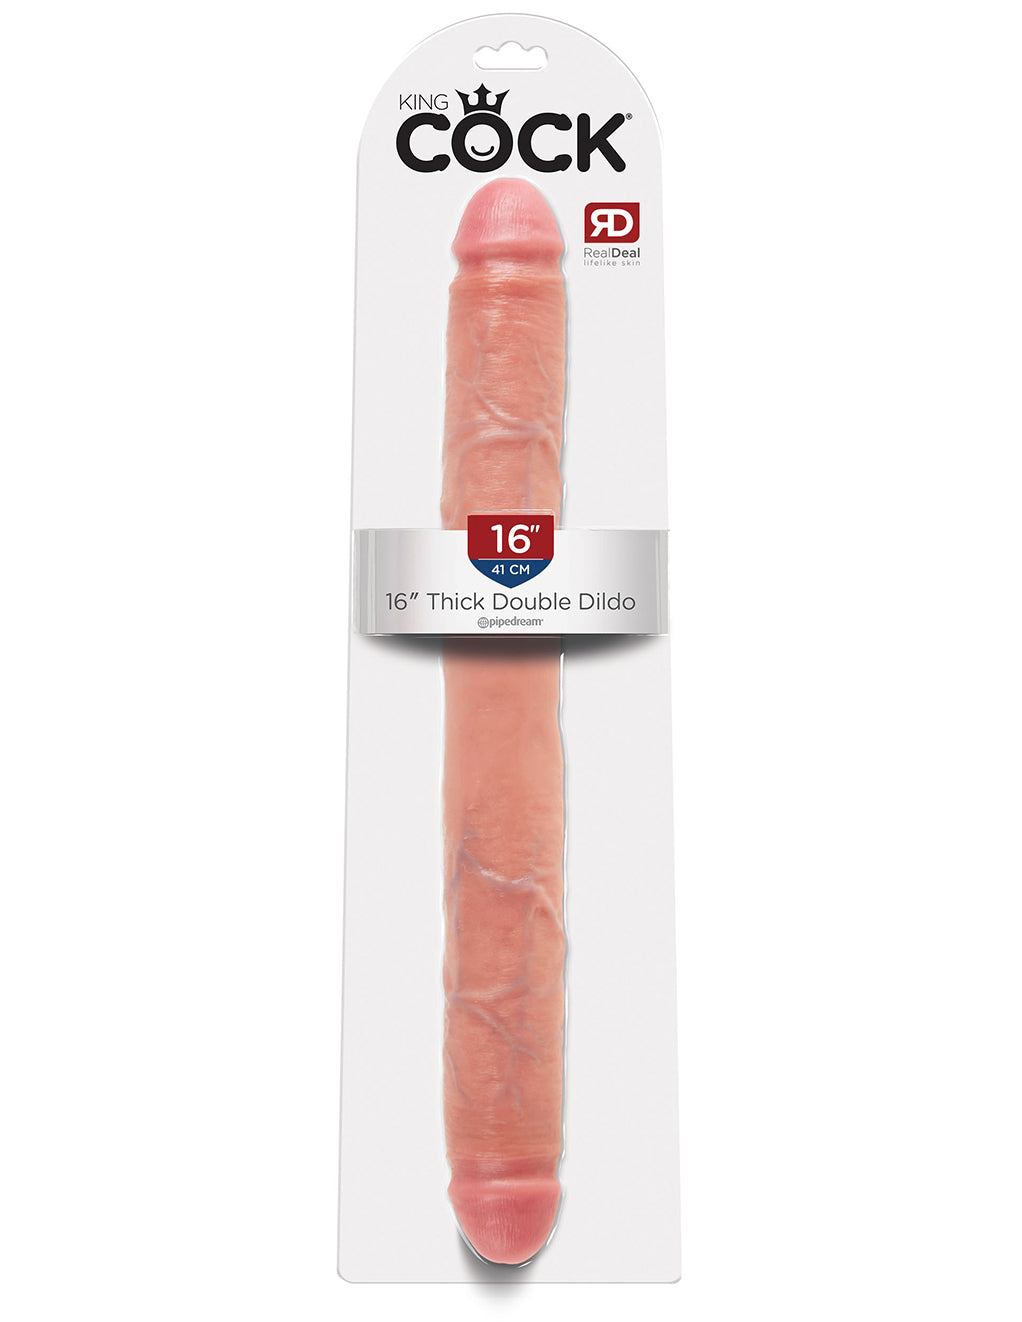 King Cock 16 Inch Thick Double Dildo- Vanilla- Package